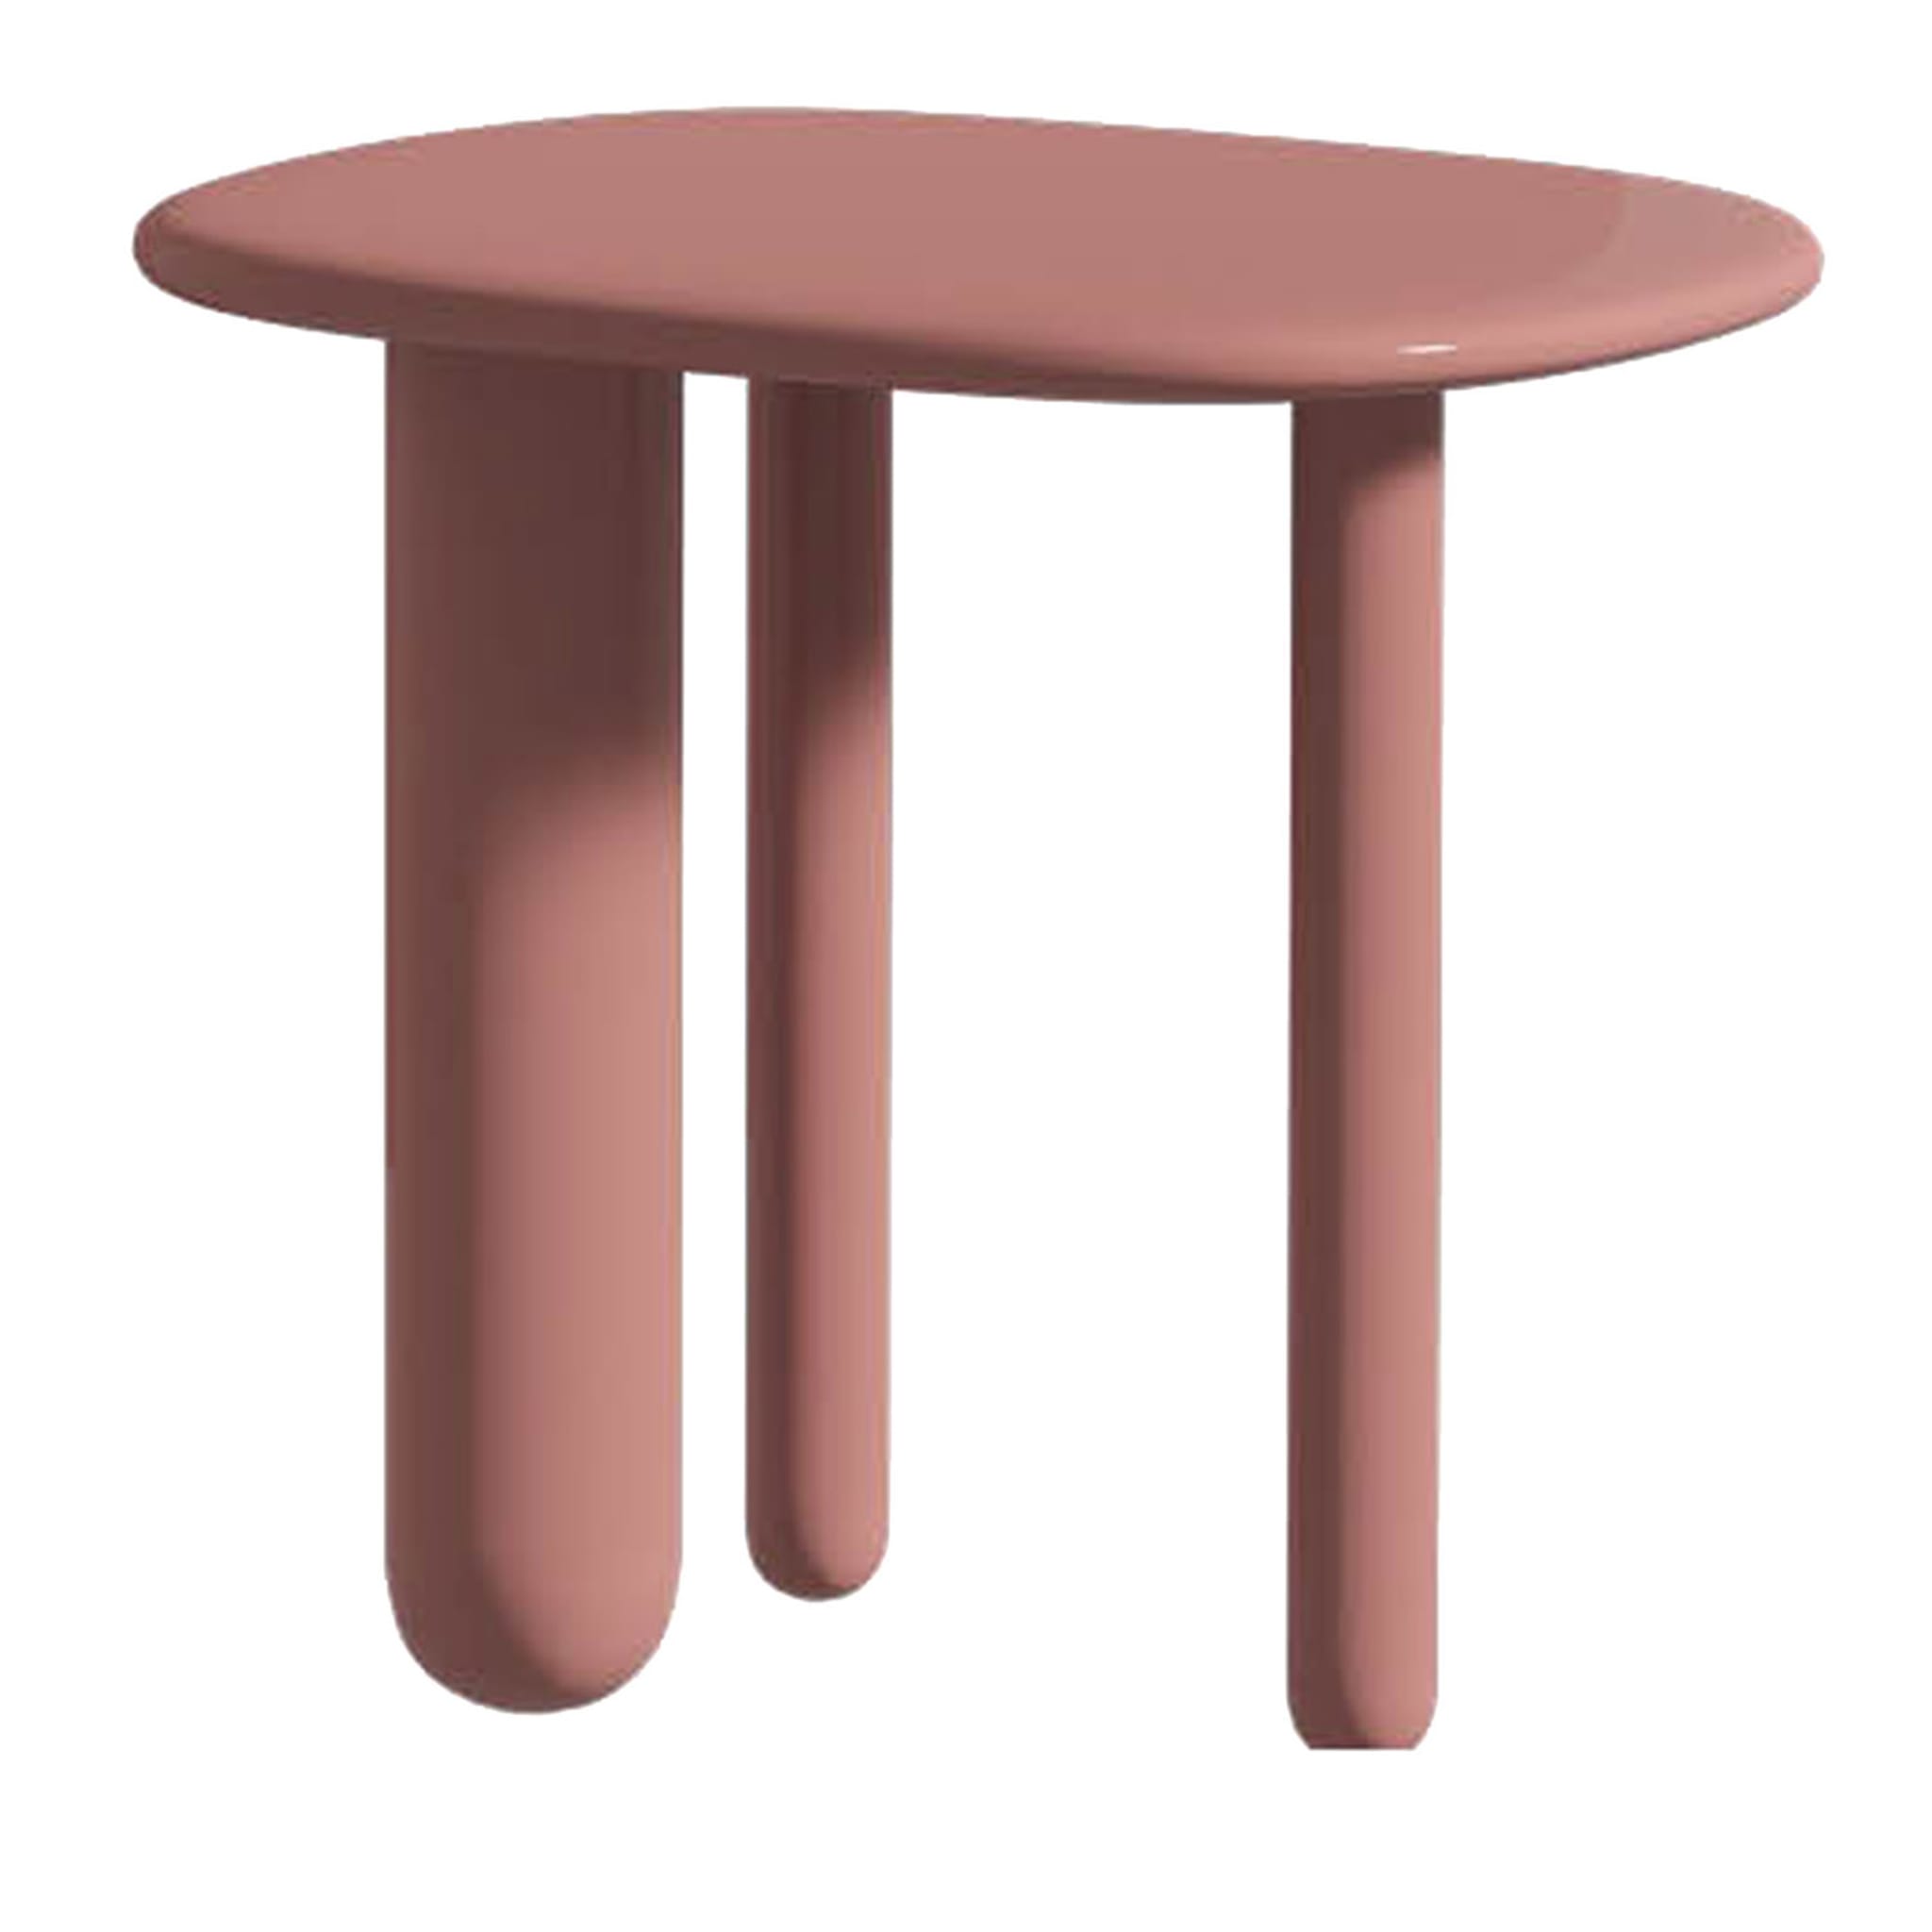 Tottori Brown Accent Table by Kateryna Sokolova - Main view